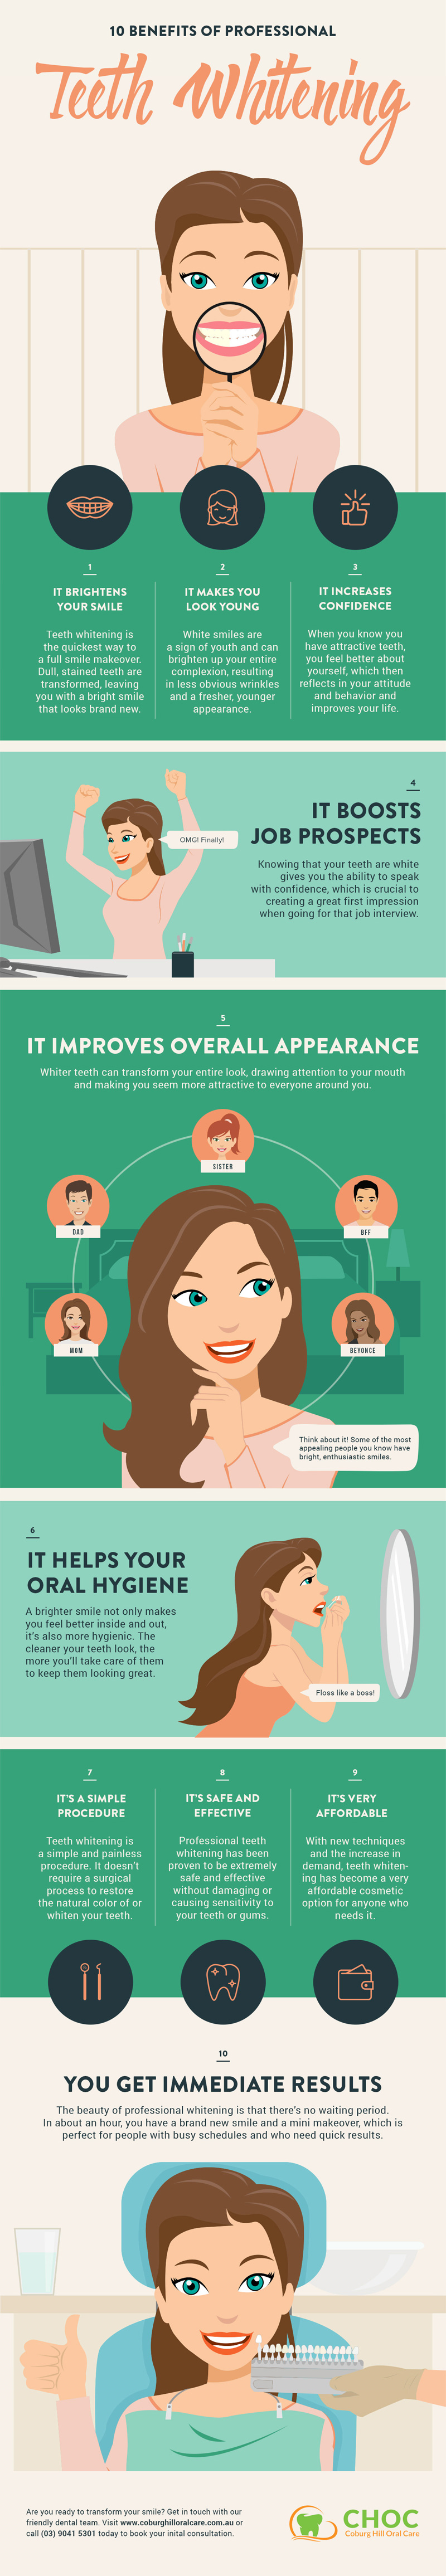 Top 10  Benefits Professional Teeth Whitening #infographic # Health & Beauty